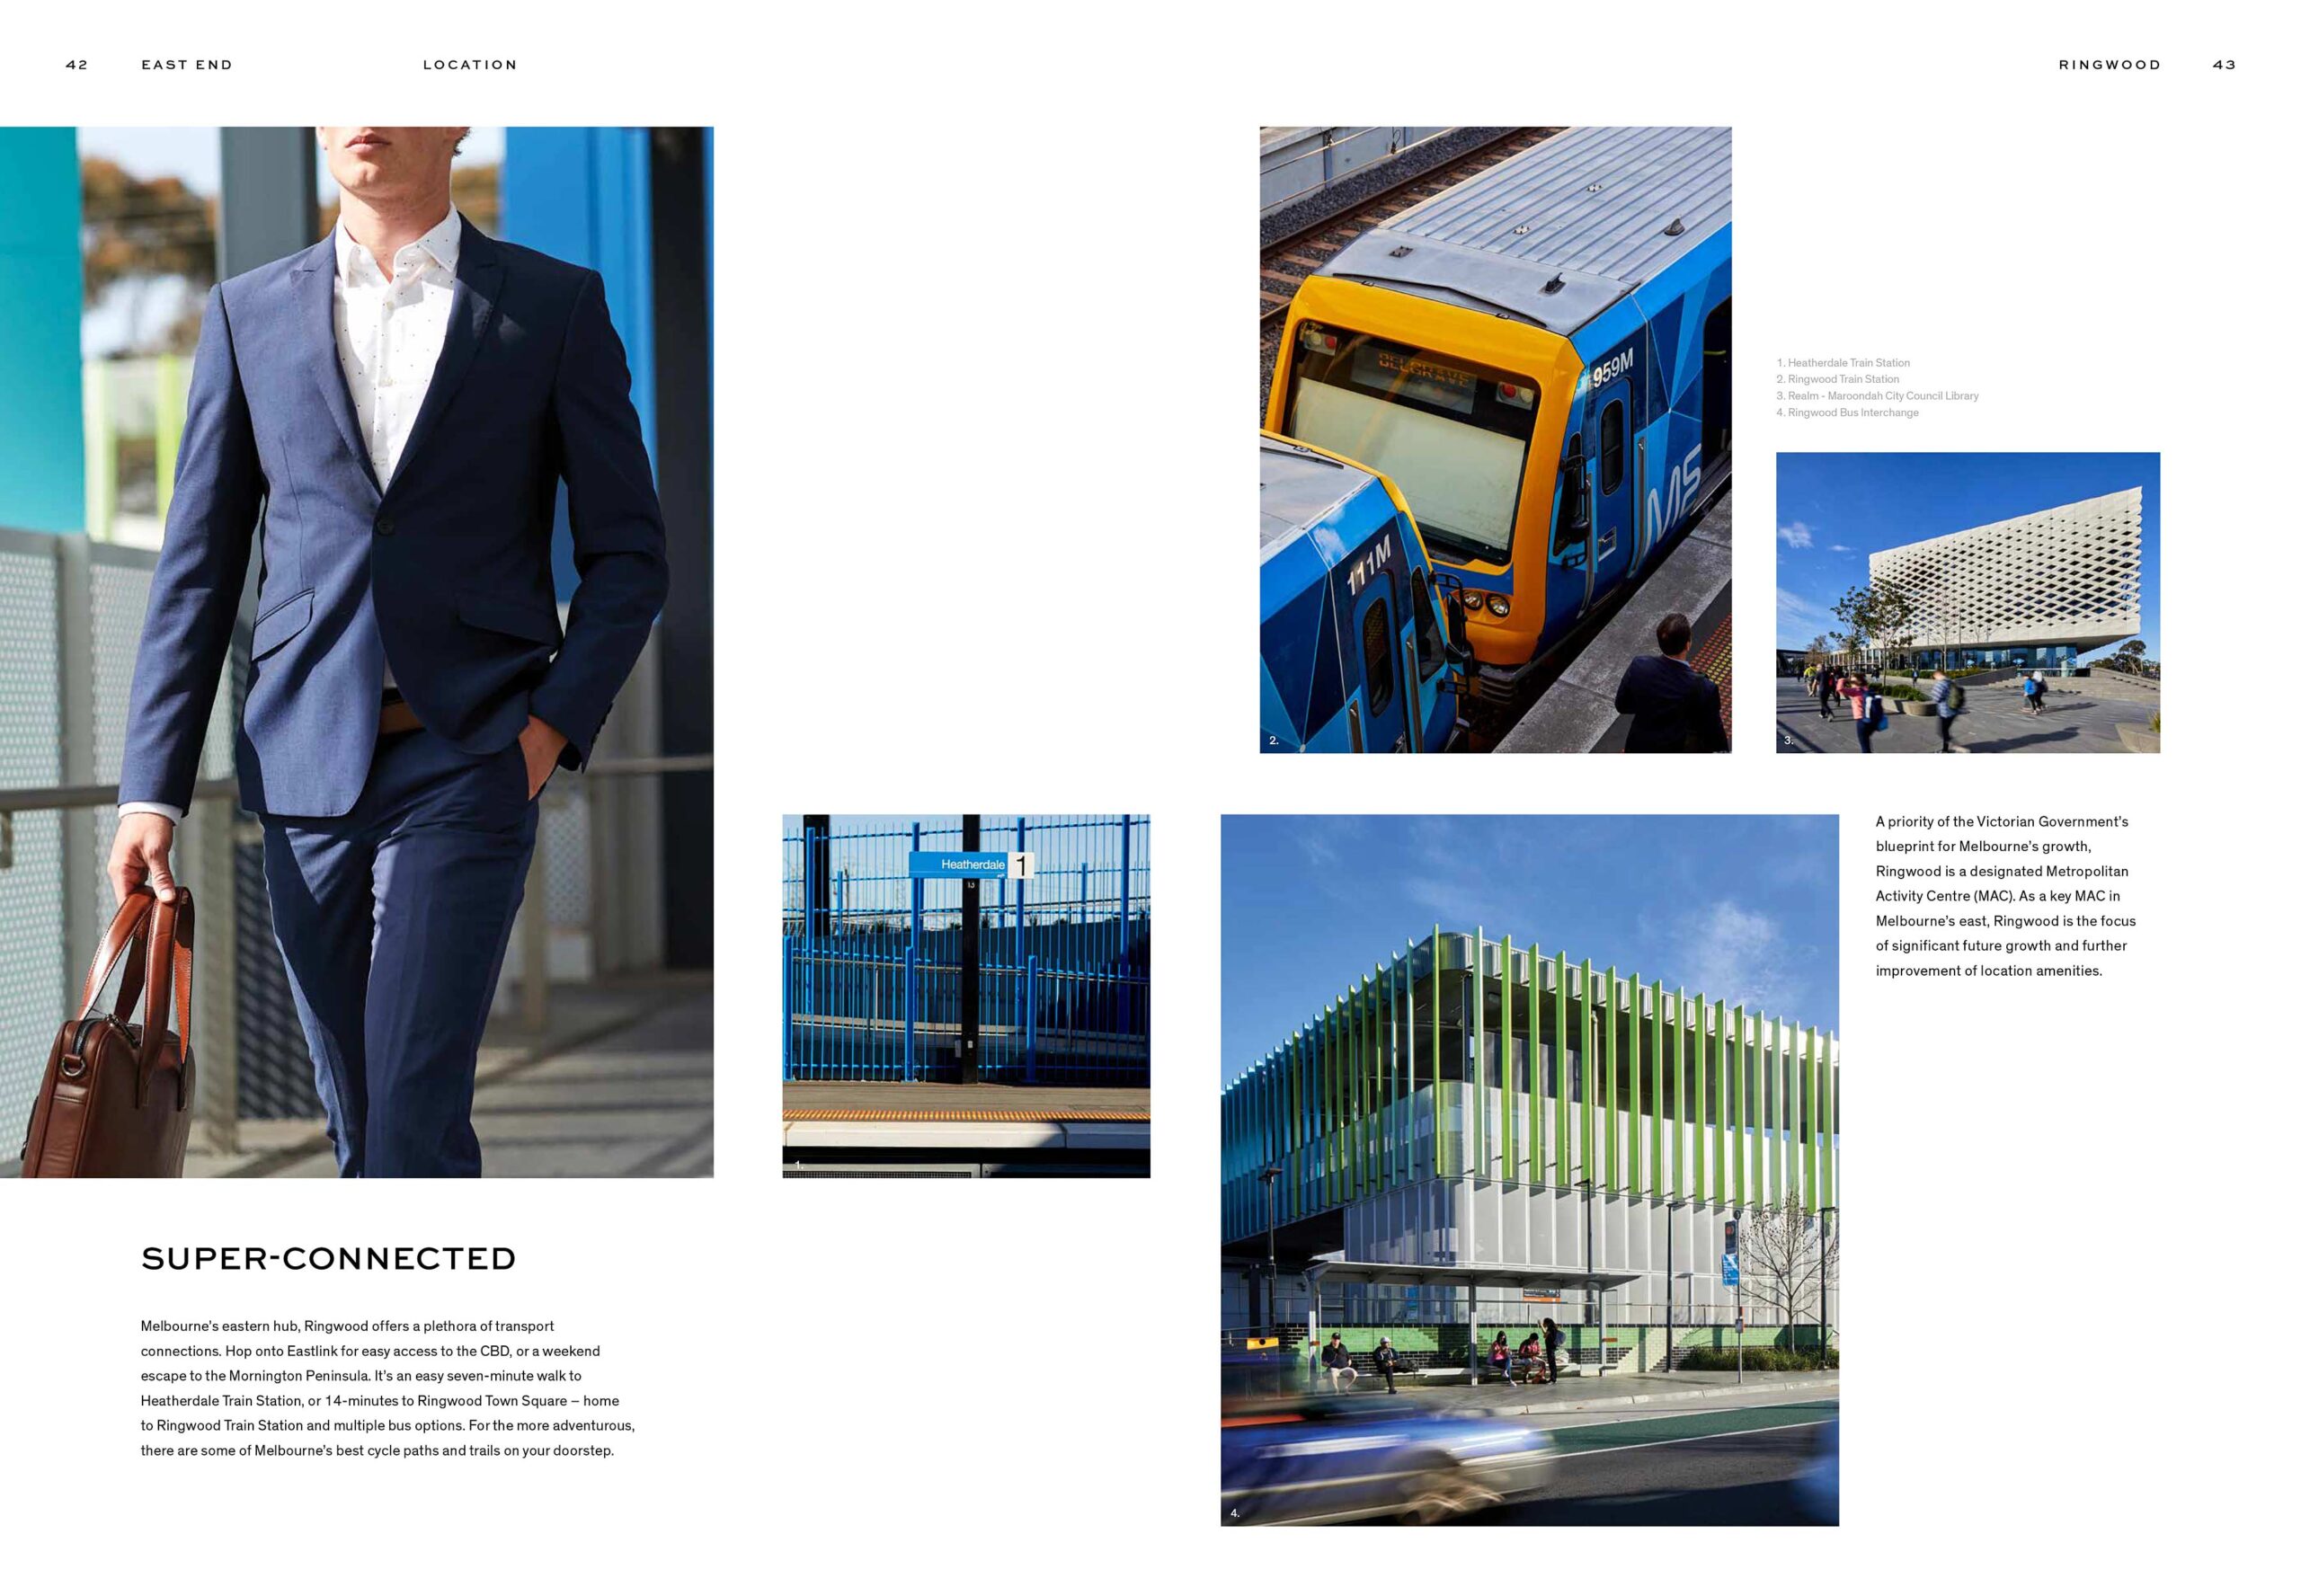 Lifestyle campaign photos of Melbourne suburb Ringwood, showing train stations shopping and man in business attire